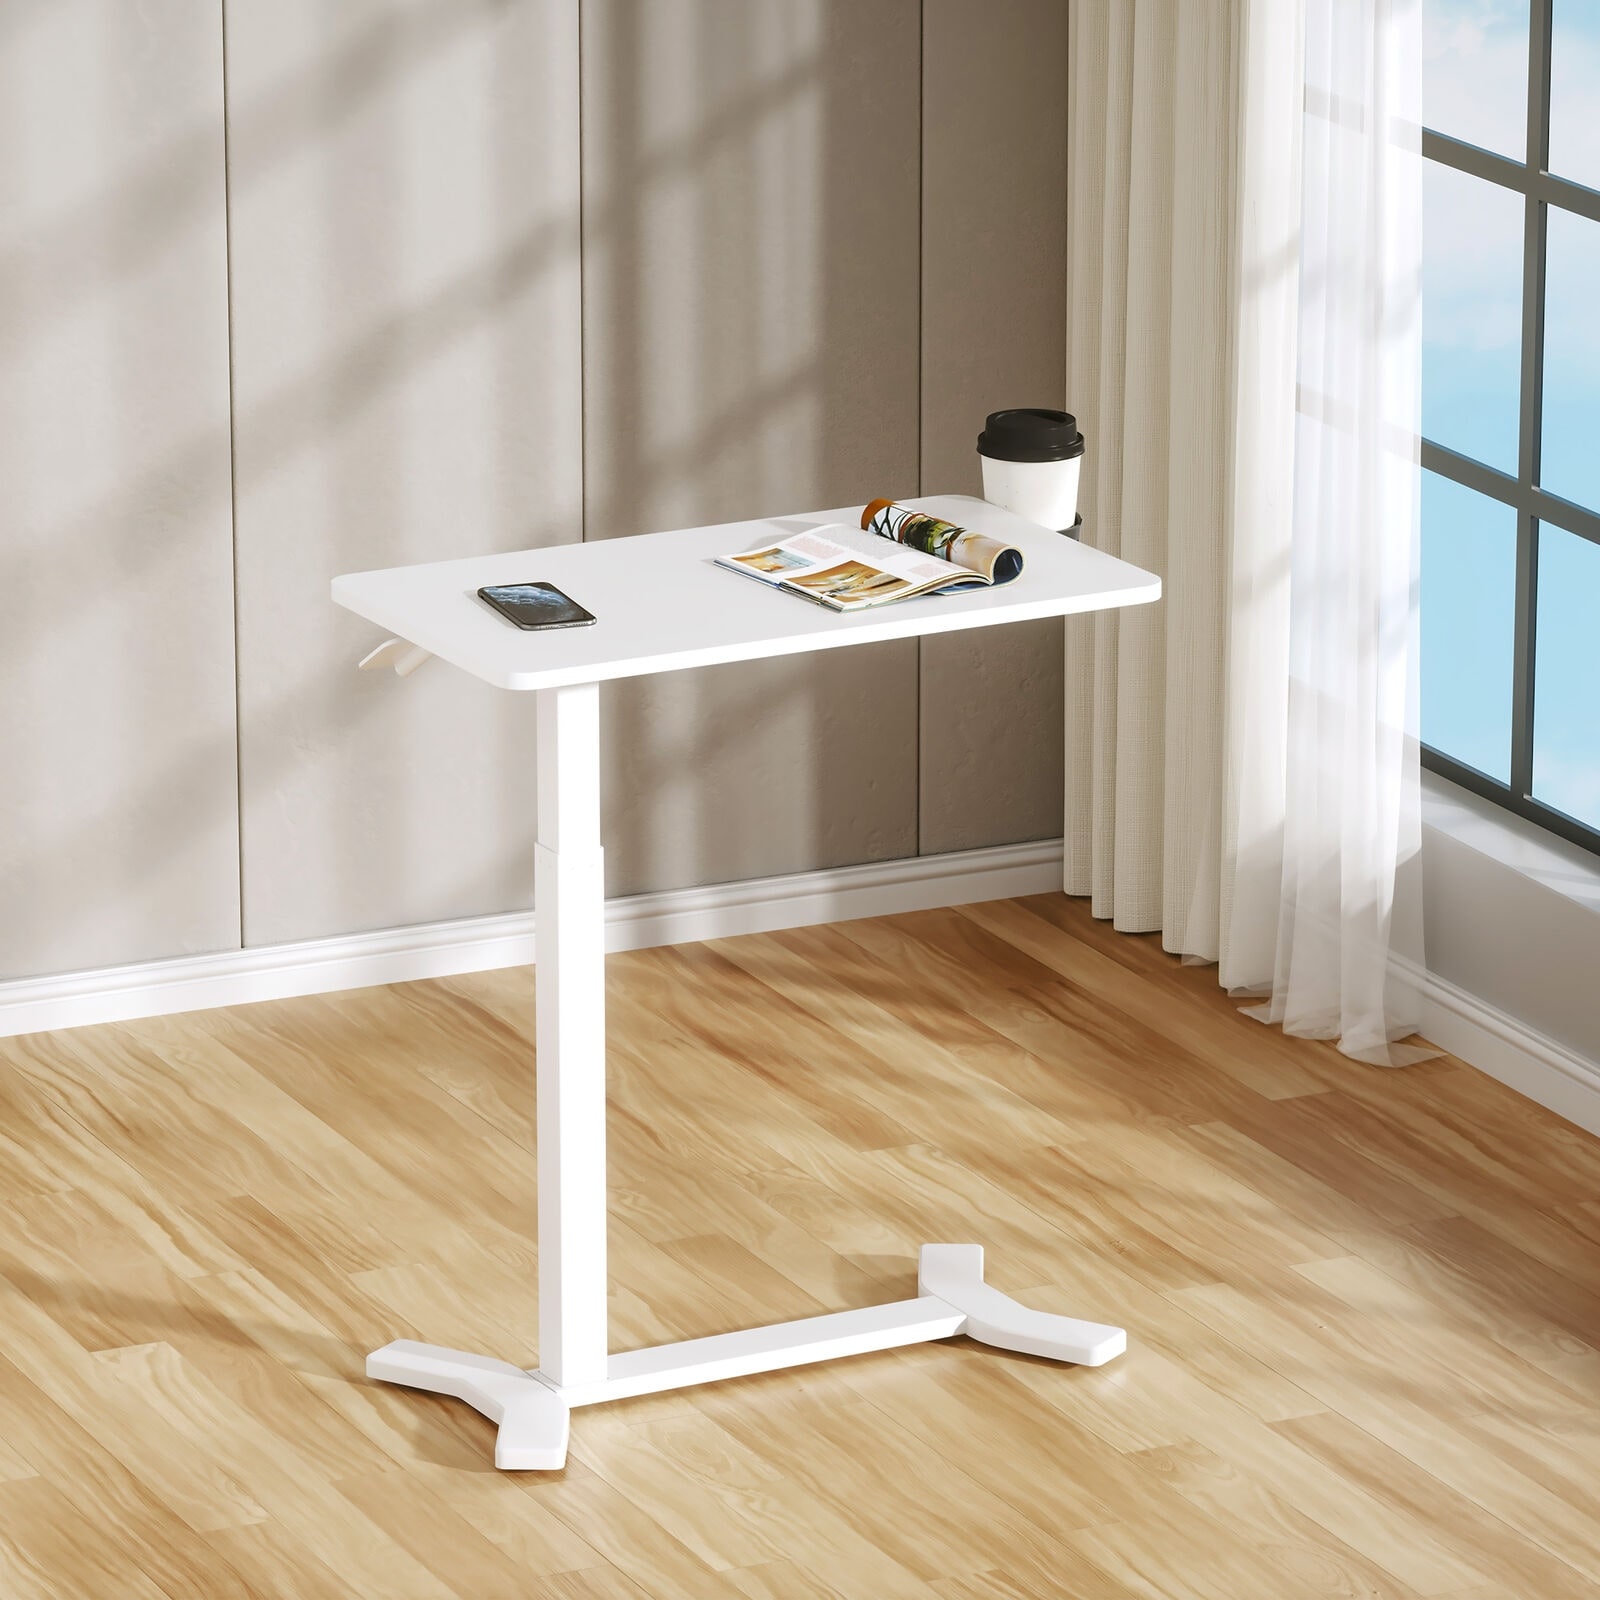 https://ak1.ostkcdn.com/images/products/is/images/direct/fa2ebfc578351a3d6479cdfa9d8829adbeafeec2/FlexiSpot-28%22%2C32%22-Mobile-Overbed-Table-Height-Adjustable-Computer-Desk-with-Wheels%2C-Gas-Spring-Pneumatic.jpg